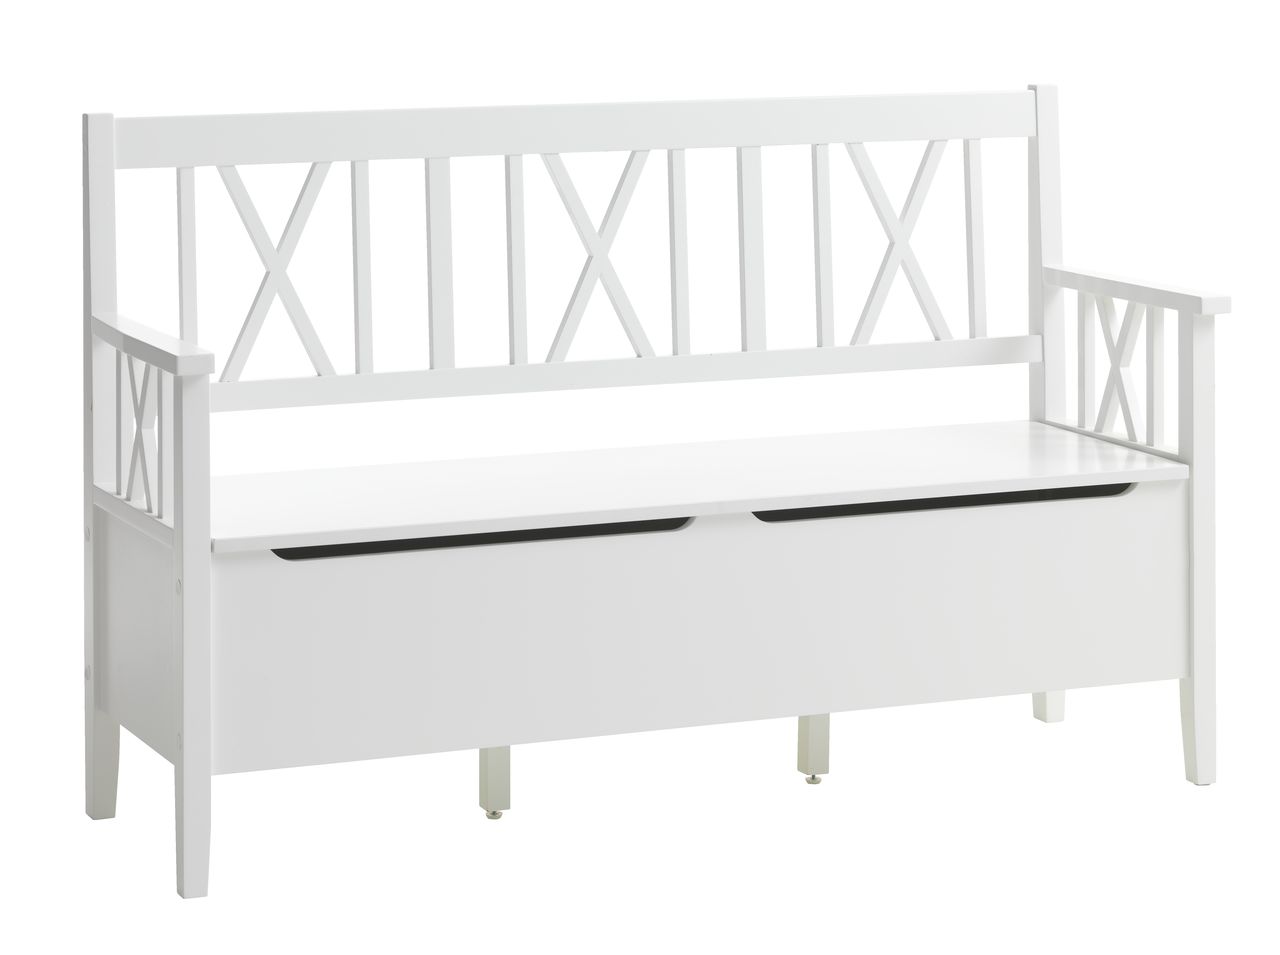 59 L Dining Bench White Naugahyde Seat Polished Stainless Steel